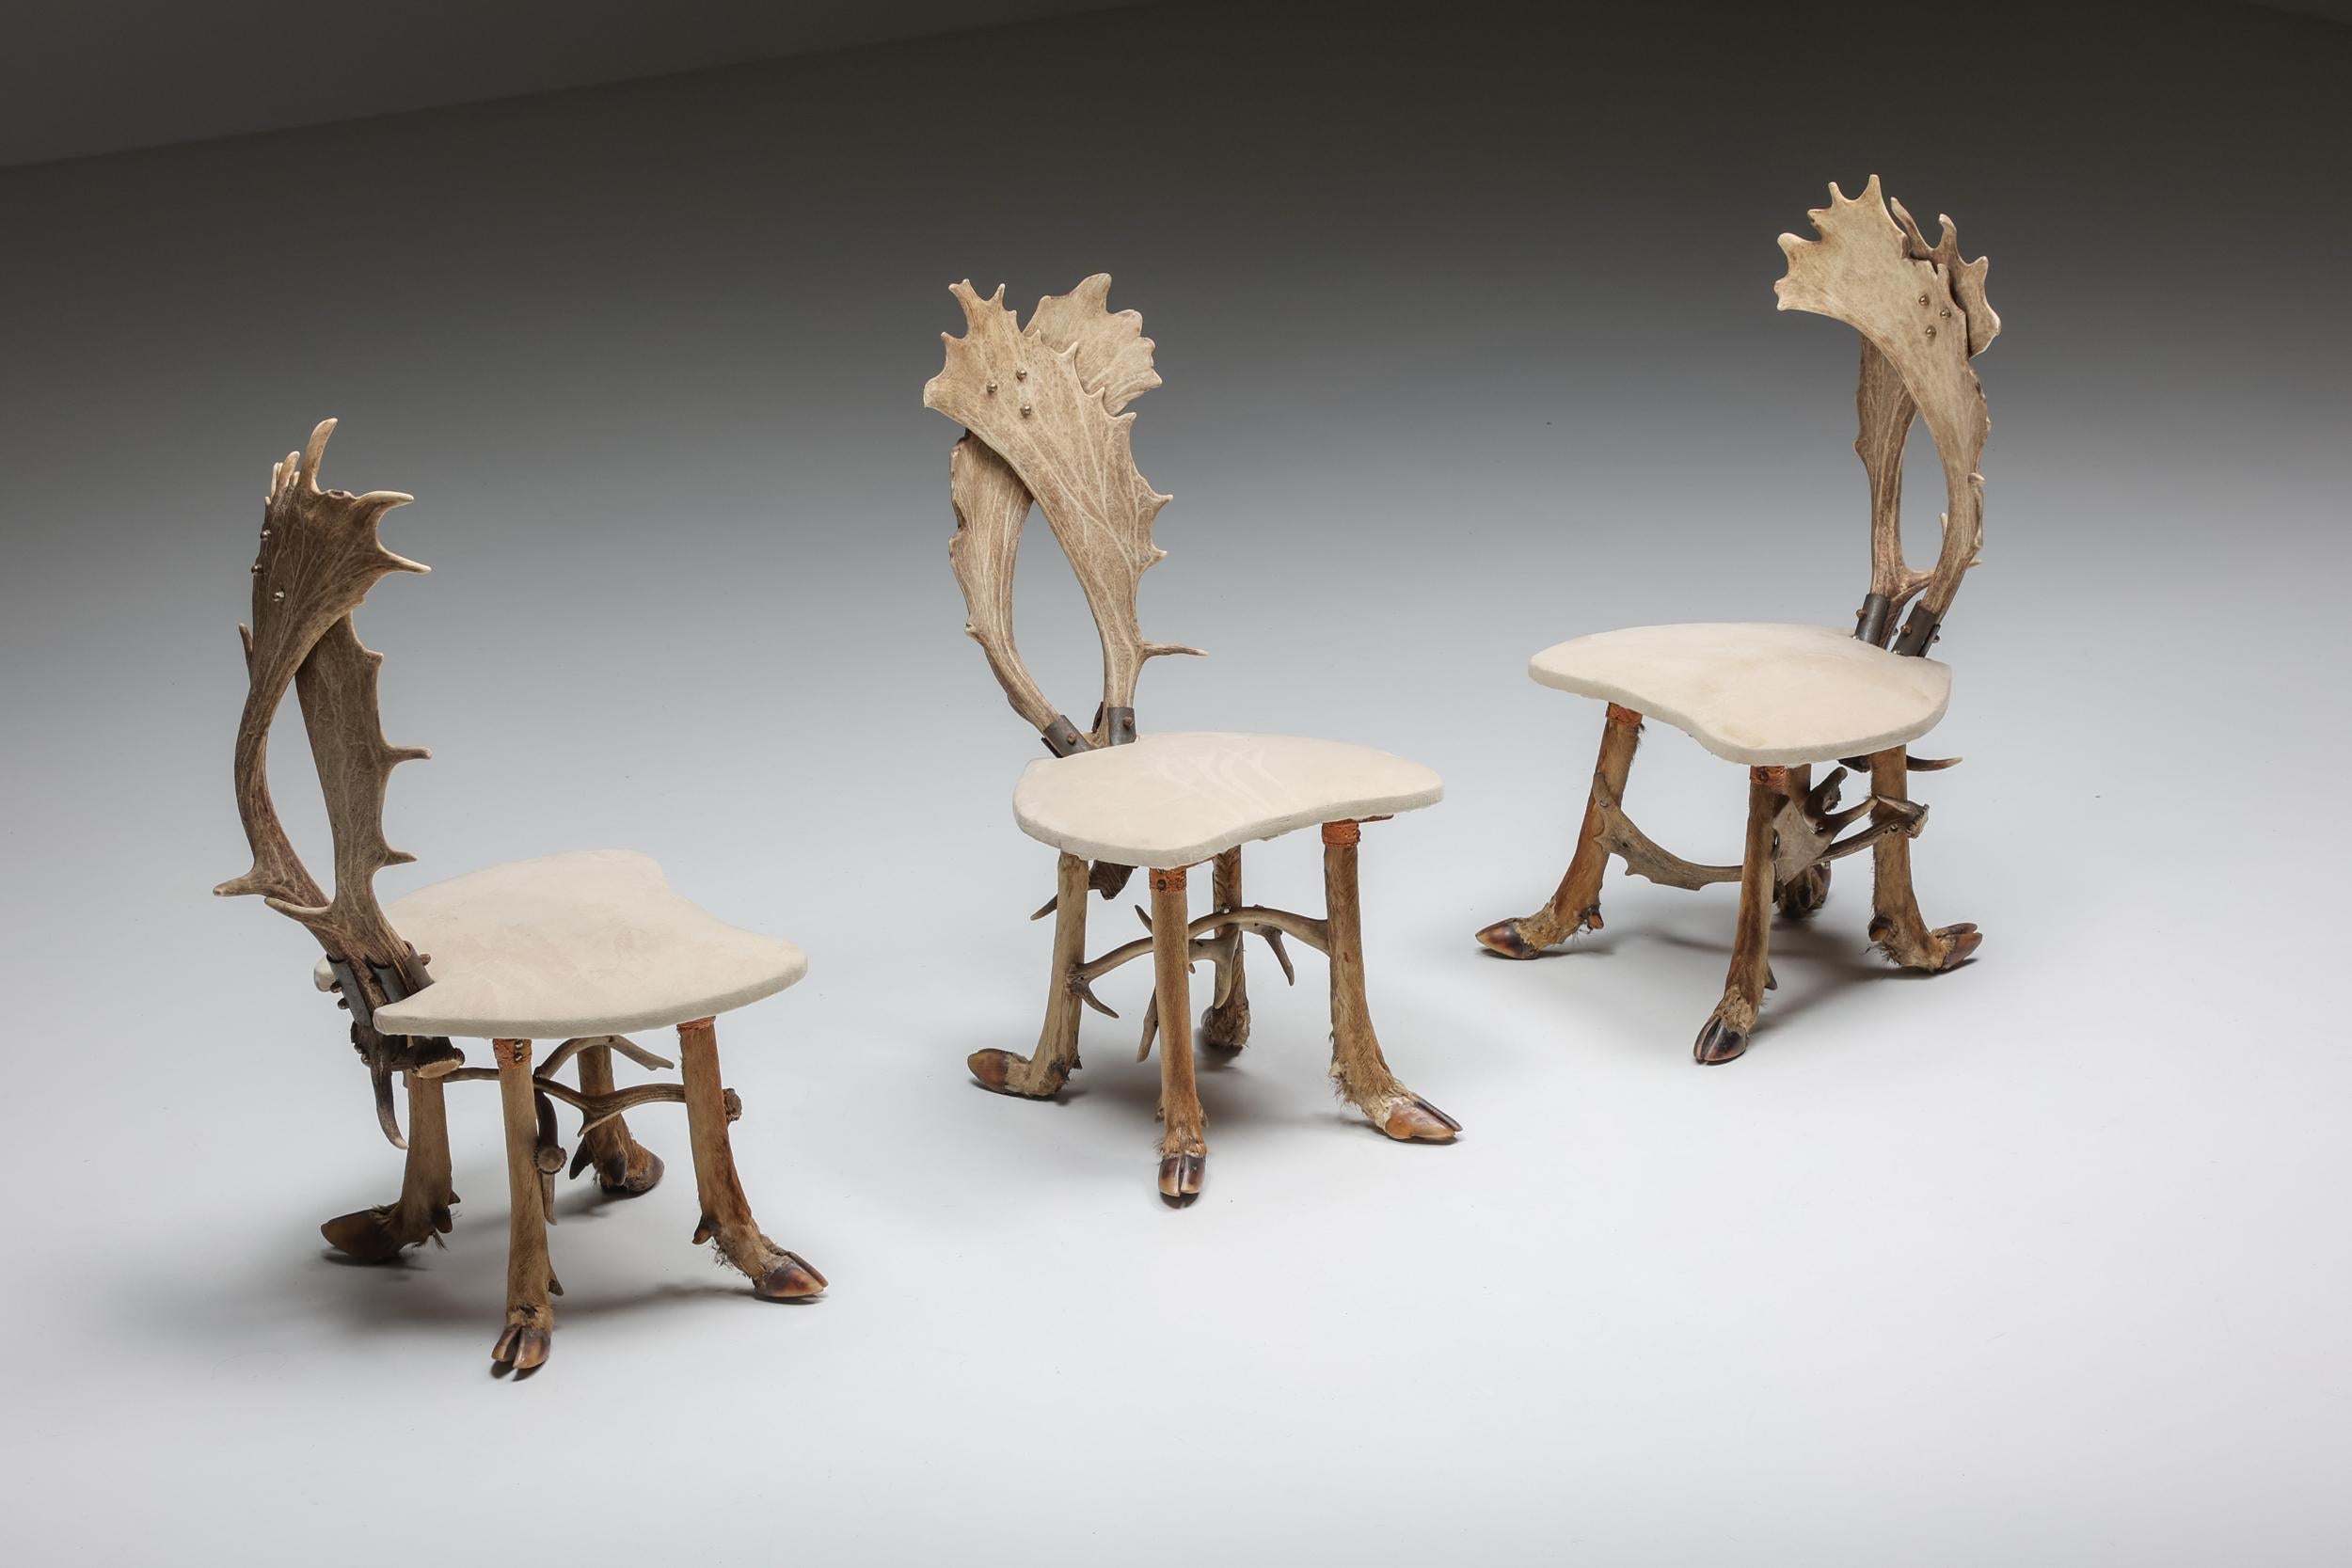 Set of hunting chairs and matching table - 1950s

Mid-century hunting chairs set of three made in the 1950s in Sweden. The back of the chairs are made of two deer antlers while the legs are constructed out of deer hooves. The seats are upholstered